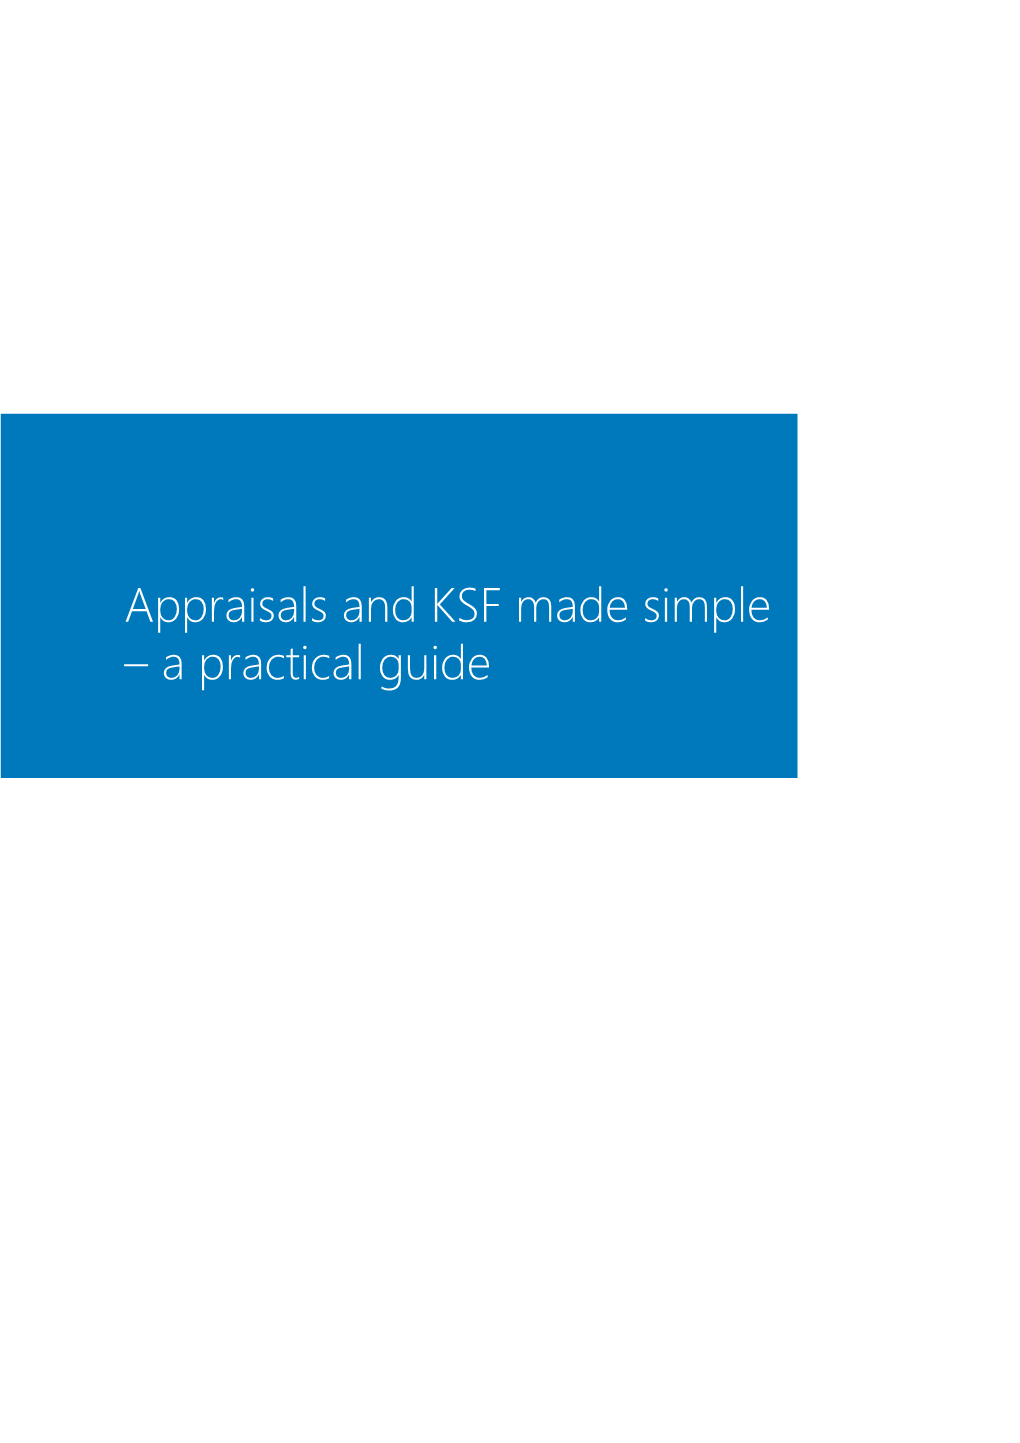 Appraisals and KSF Made Simple - Word Version of Full Guide